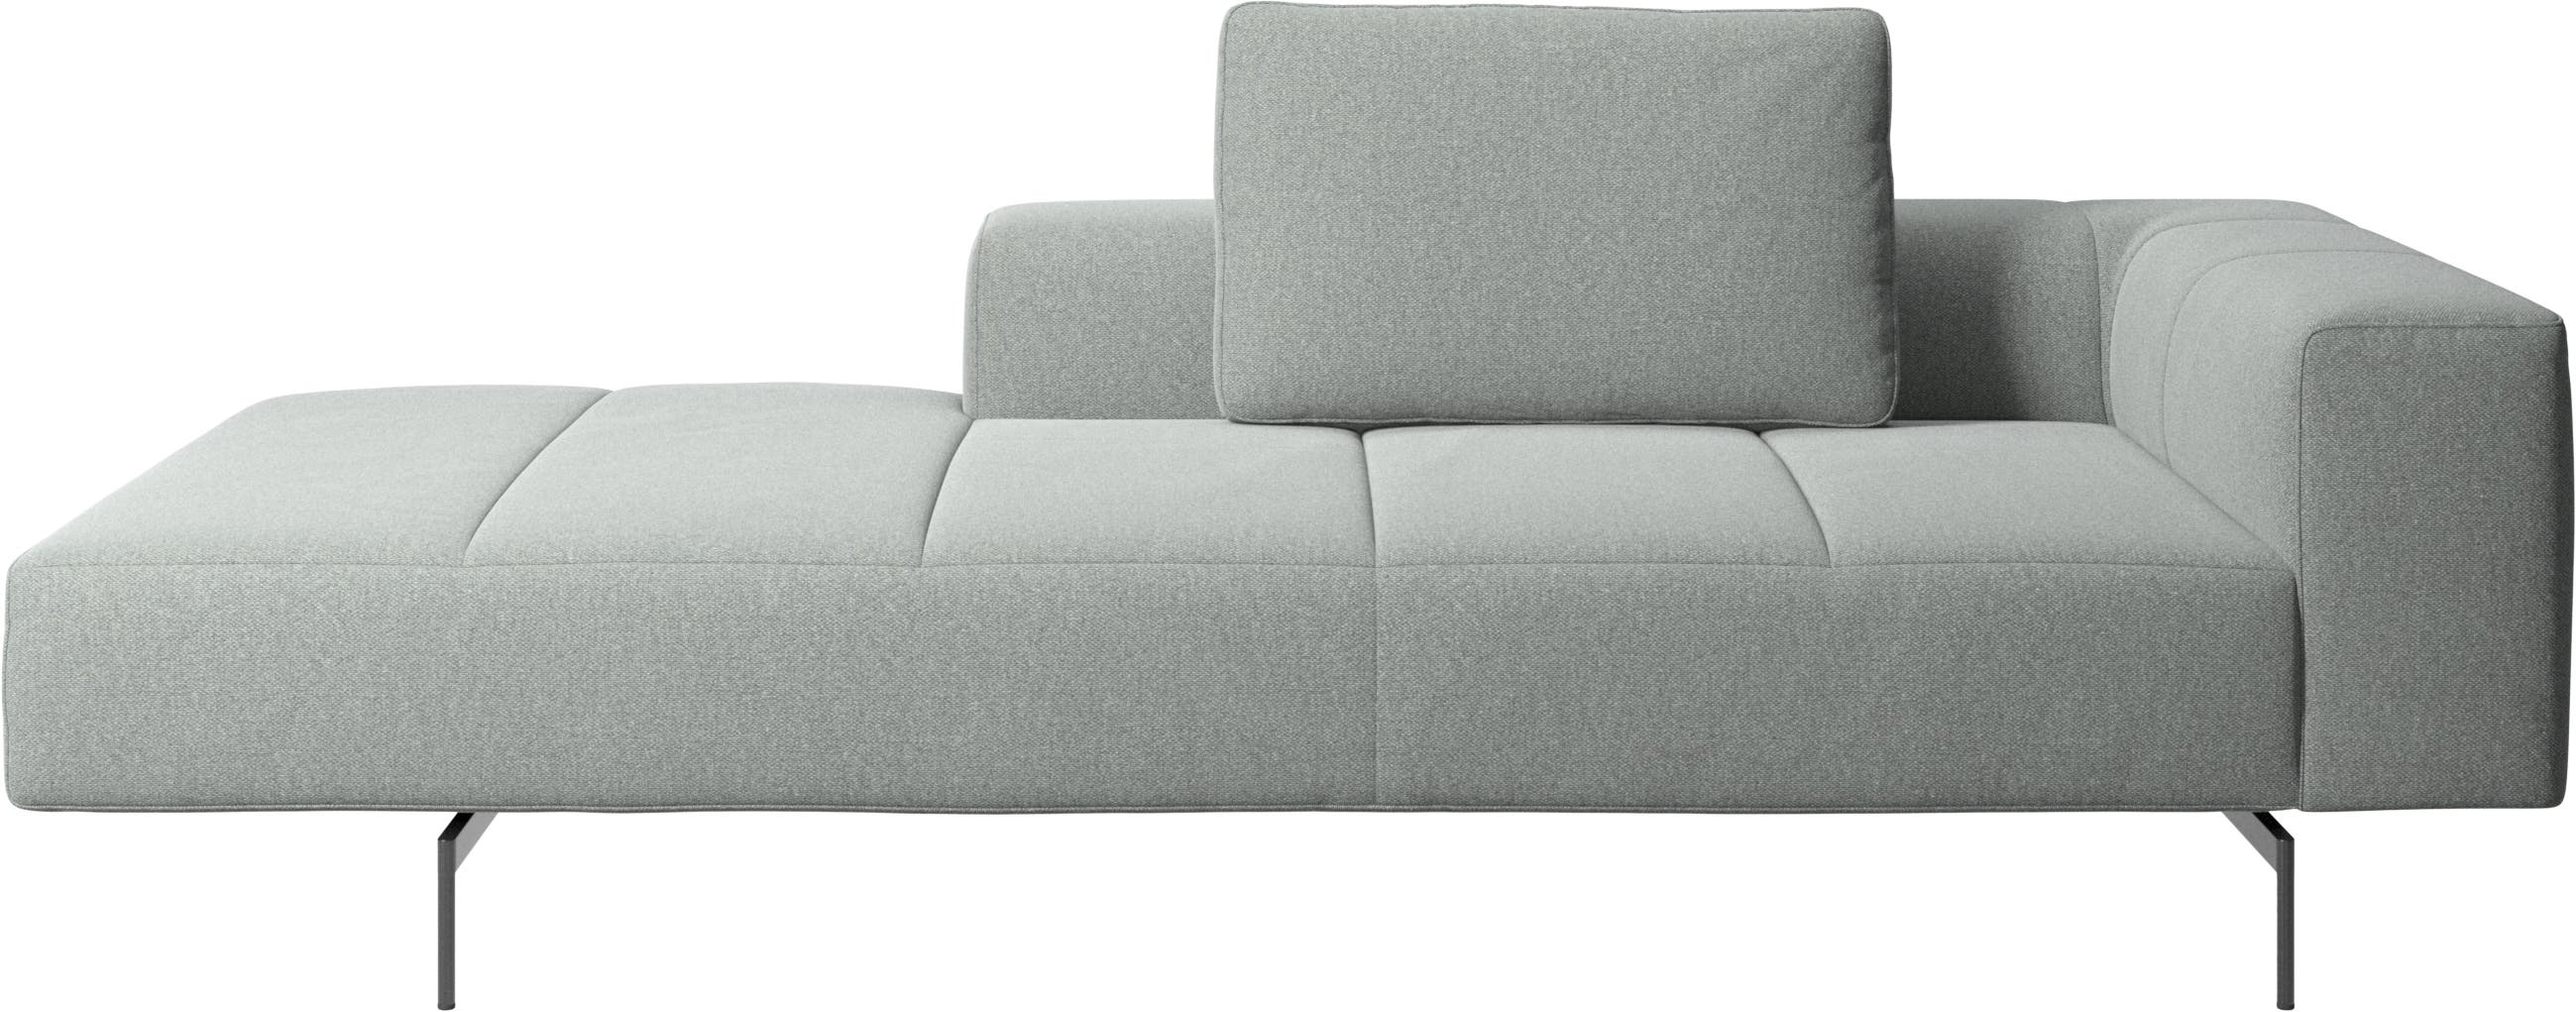 Amsterdam Iounging module for sofa, armrest right, open end left